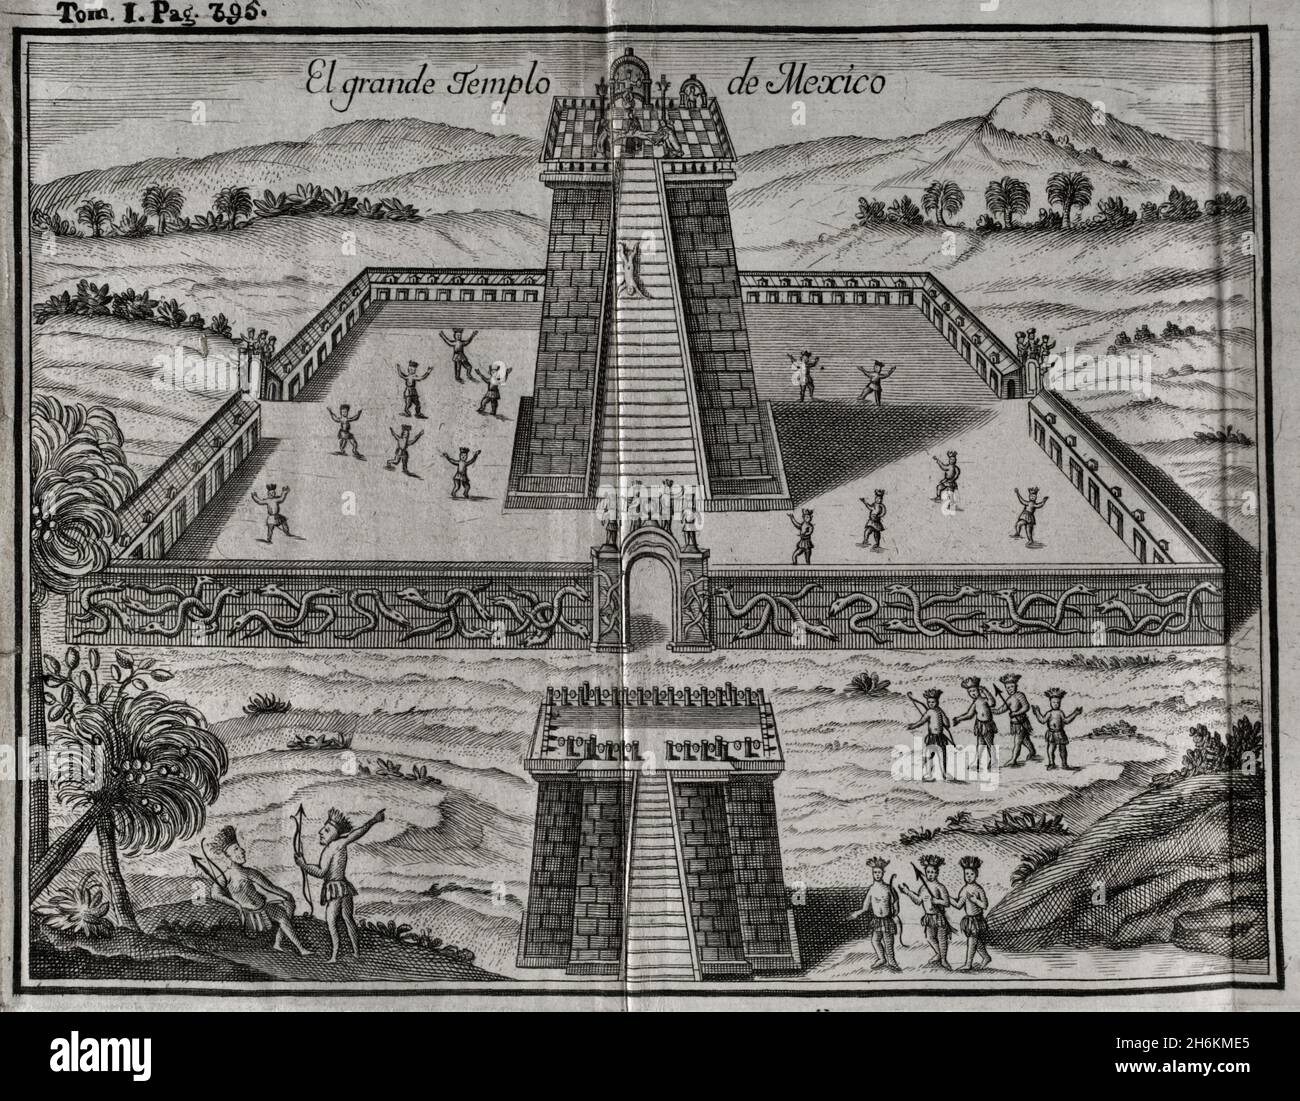 The Great Aztec Temple at Tenochtitlan. Dedicated to the god of war. Built in a large square, with an ashlar wall, carved on the outside with different loops of chained snakes. Engraving. 'Historia de la Conquista de México, población, y progresos de la América septentrional, conocida por el nombre de Nueva España' (History of the Conquest of Mexico, population, and progress of northern America, known by the name of New Spain). Written by Antonio de Solís y Rivadeneryra (1610-1686), Chronicler of the Indies. Volume I. Edition published in Barcelona and divided into two volumes, 1771. King's pr Stock Photo